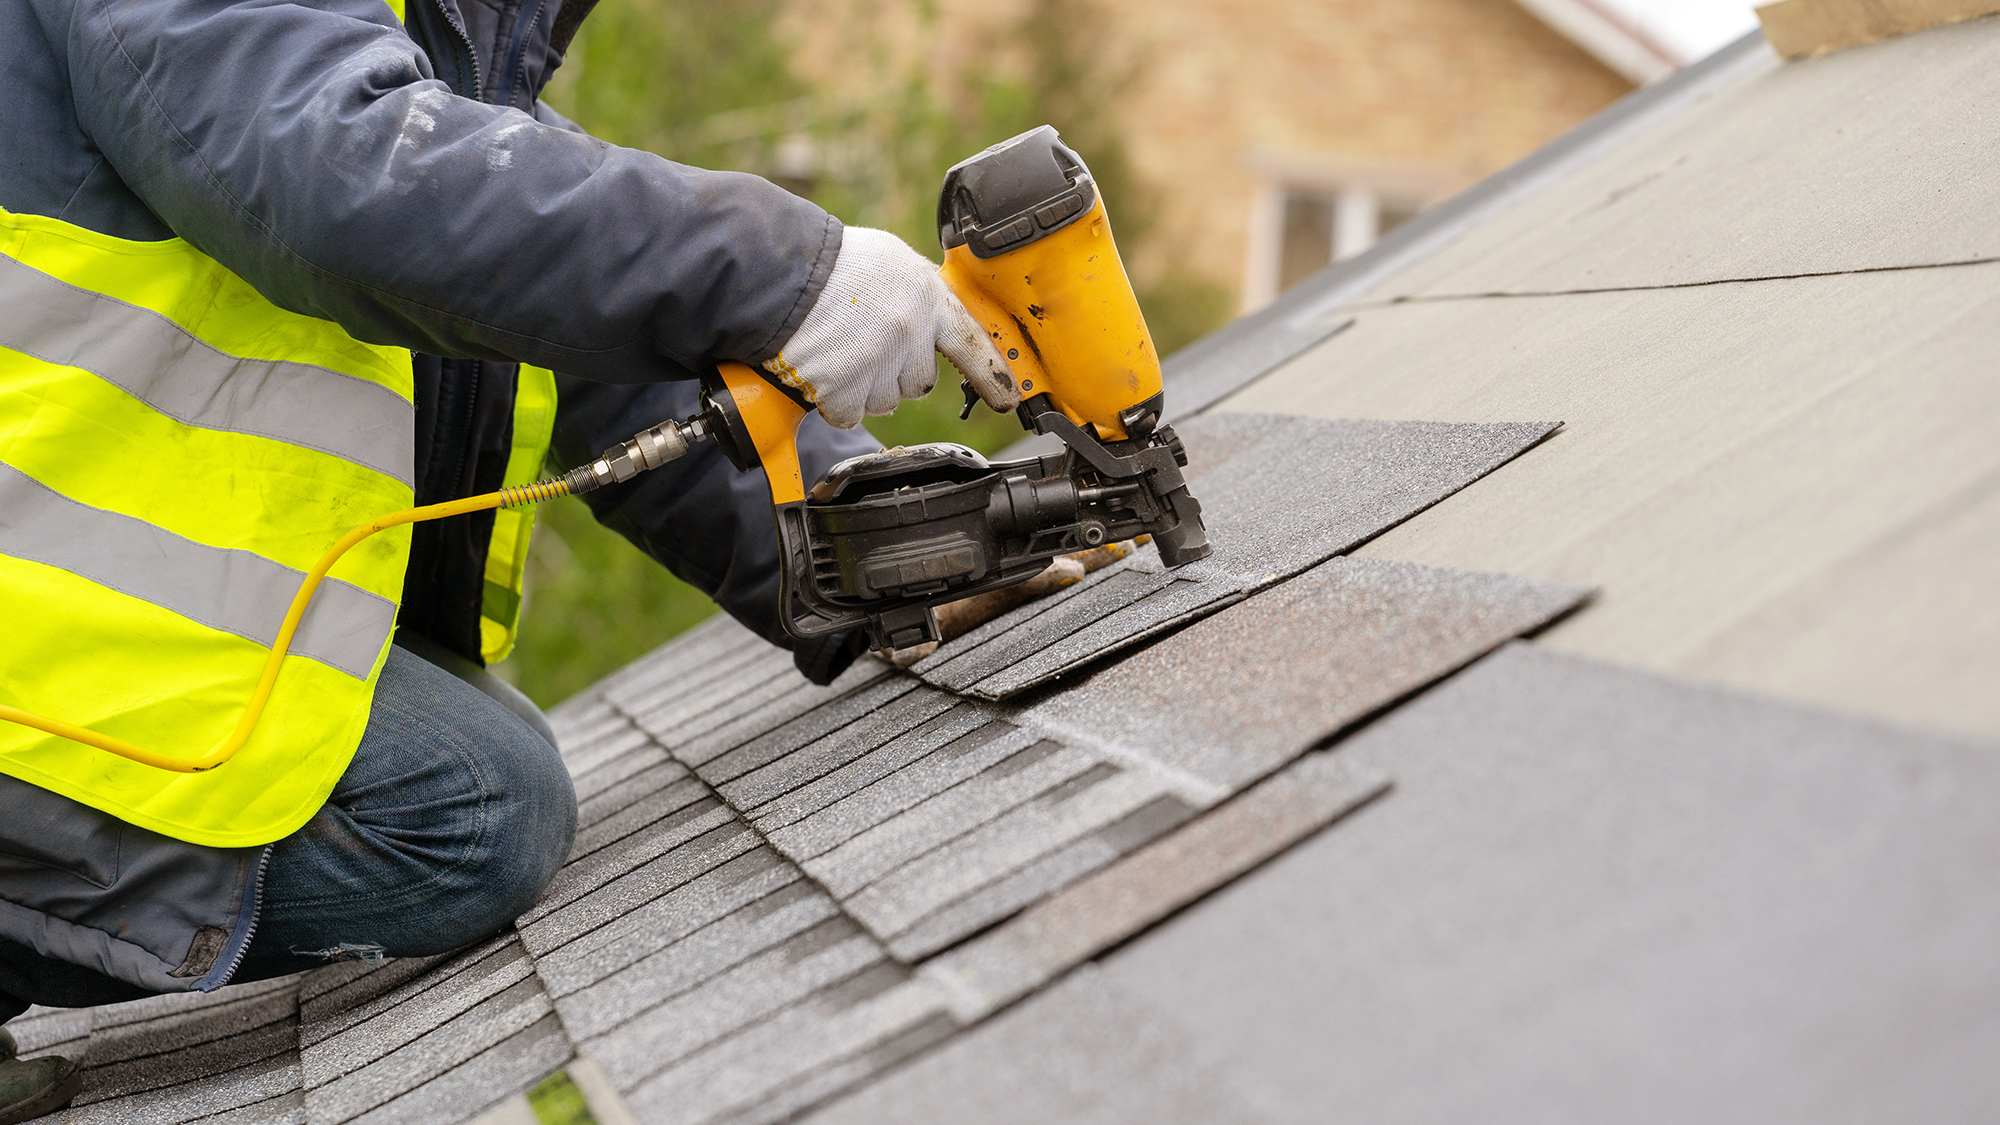 Asphalt shingles being installed on a roof